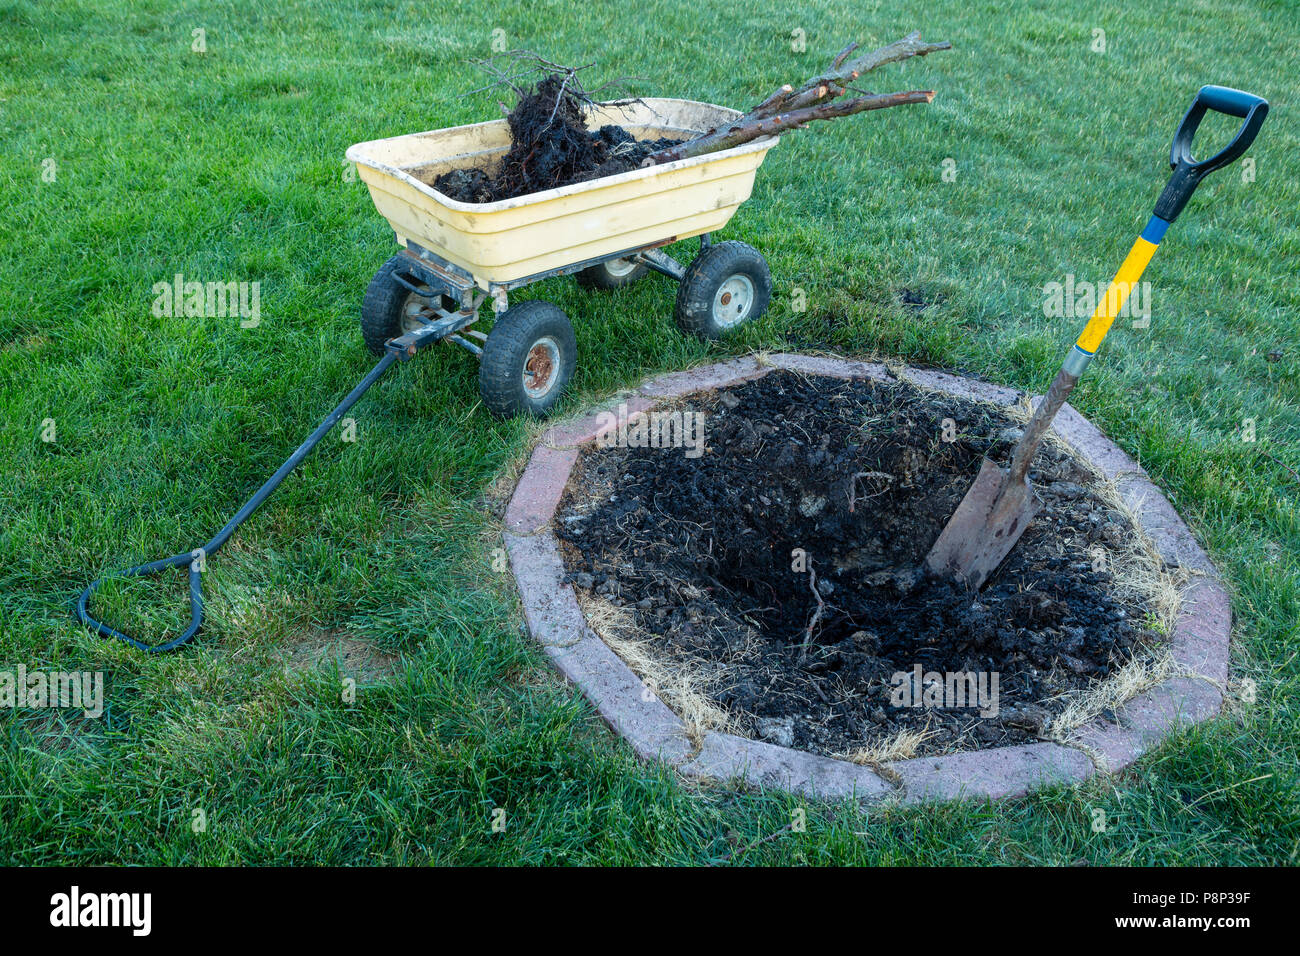 Digging up and removing a dead tree from a circular flowerbed with a small wheelbarrow in a garden Stock Photo